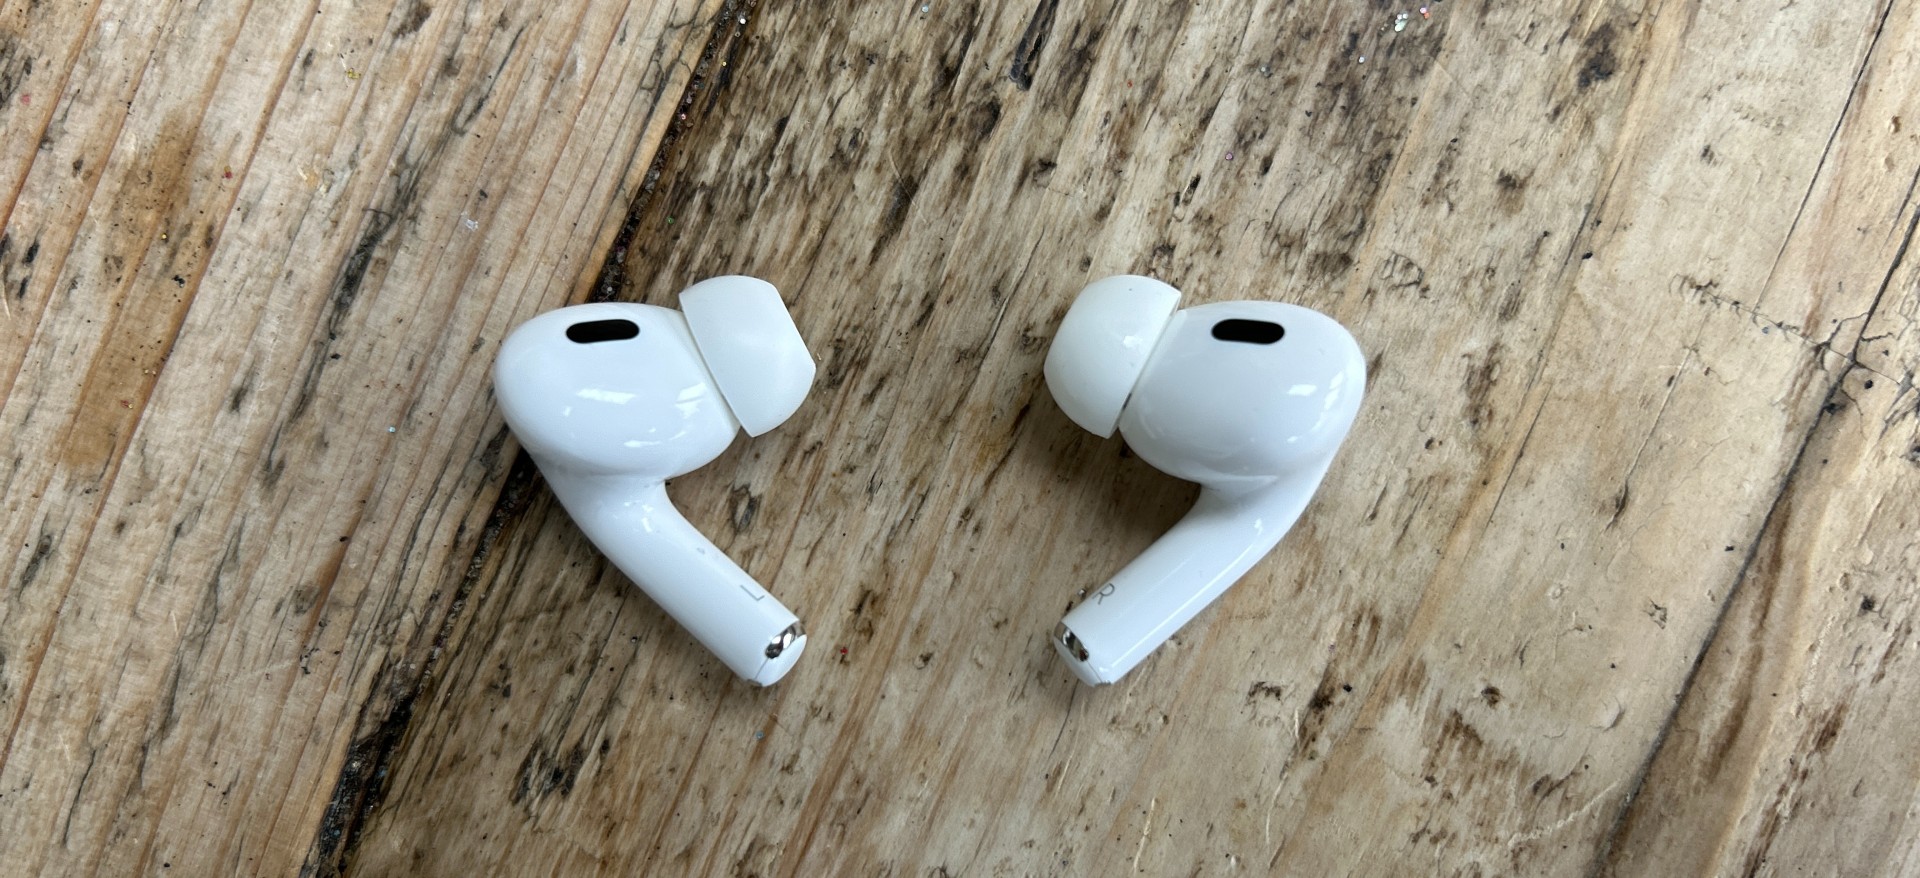 Apple AirPods Pro 2 ear buds